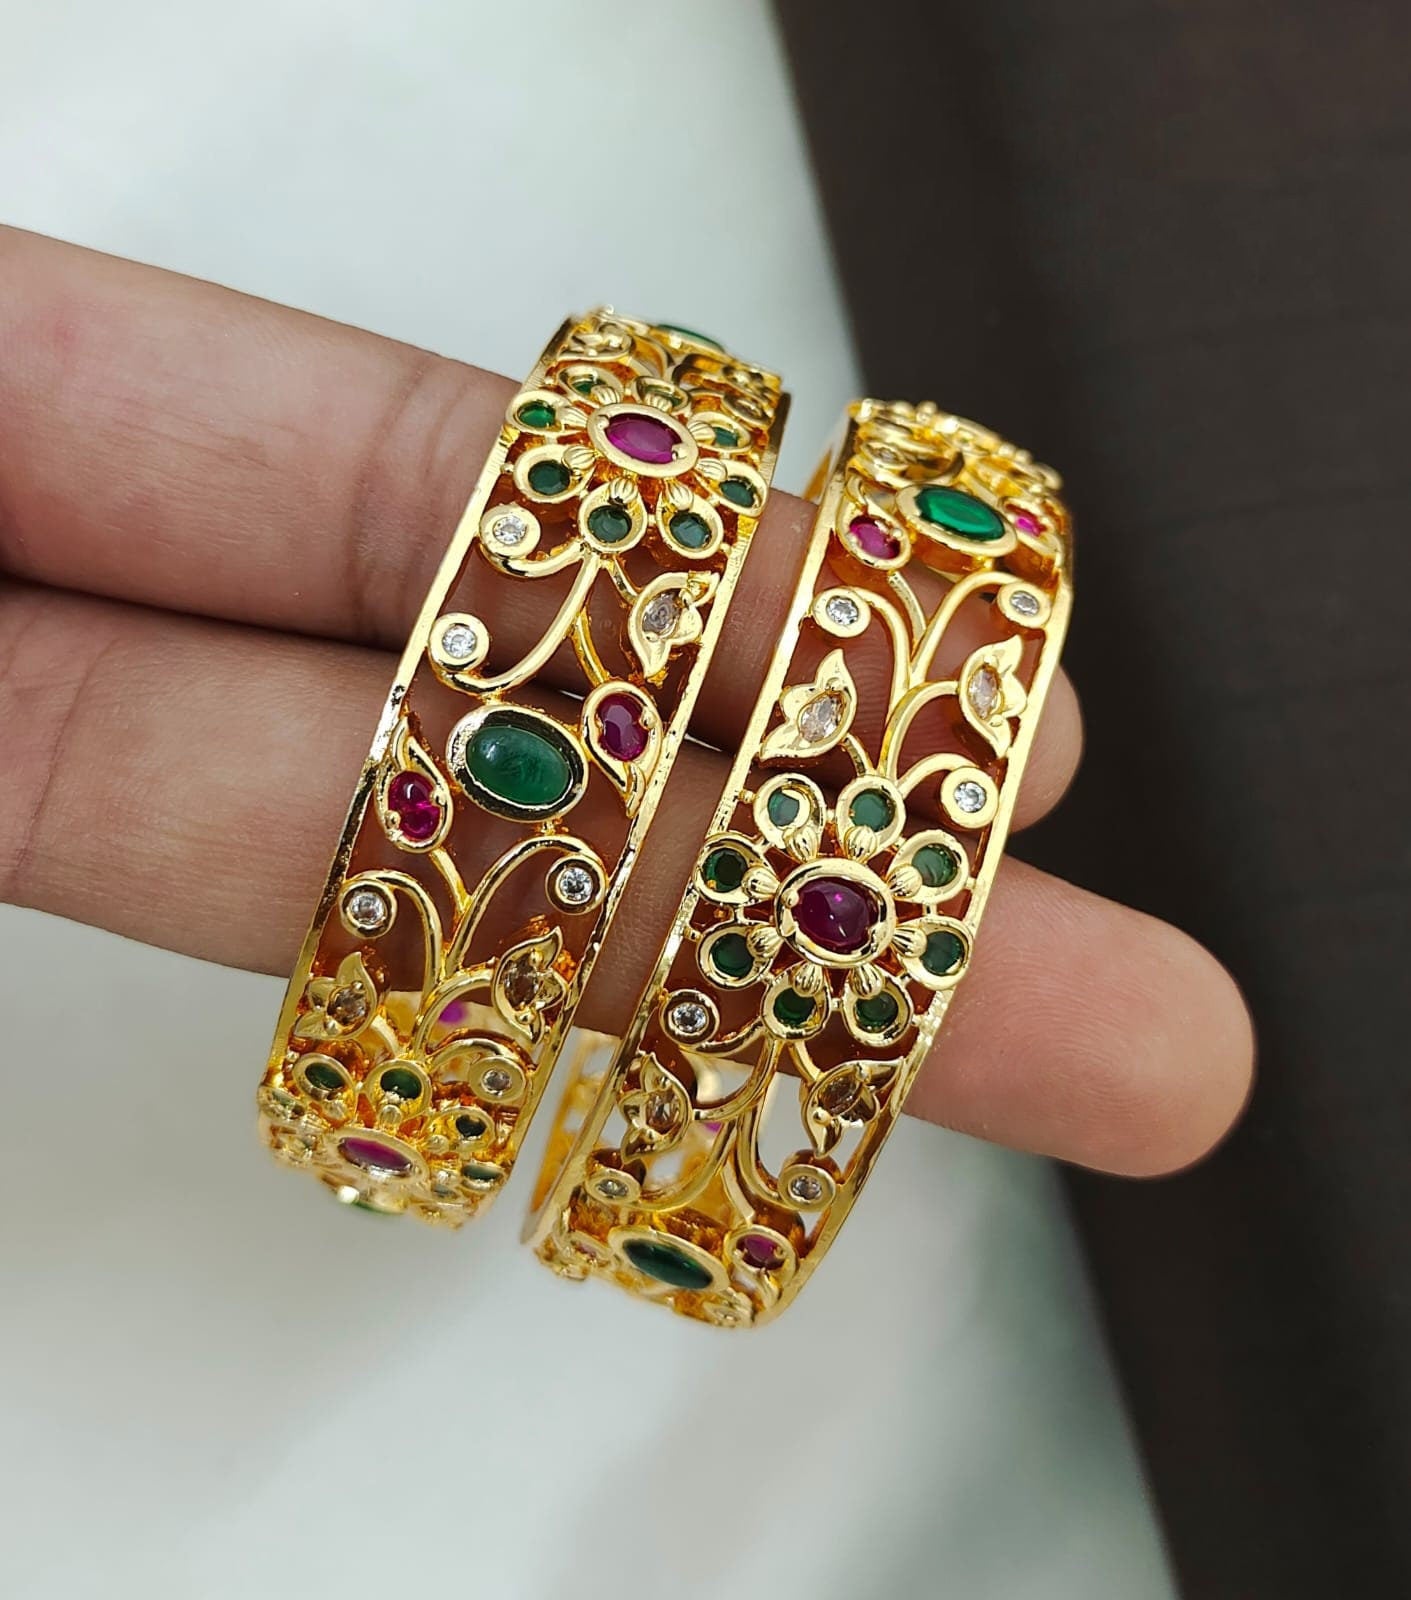 Pair of Gold Kada Bangle Designs With Stones | Ruby Emerald Floral bangles bracelets | Perfect for everyday wear |South Indian Style bangles